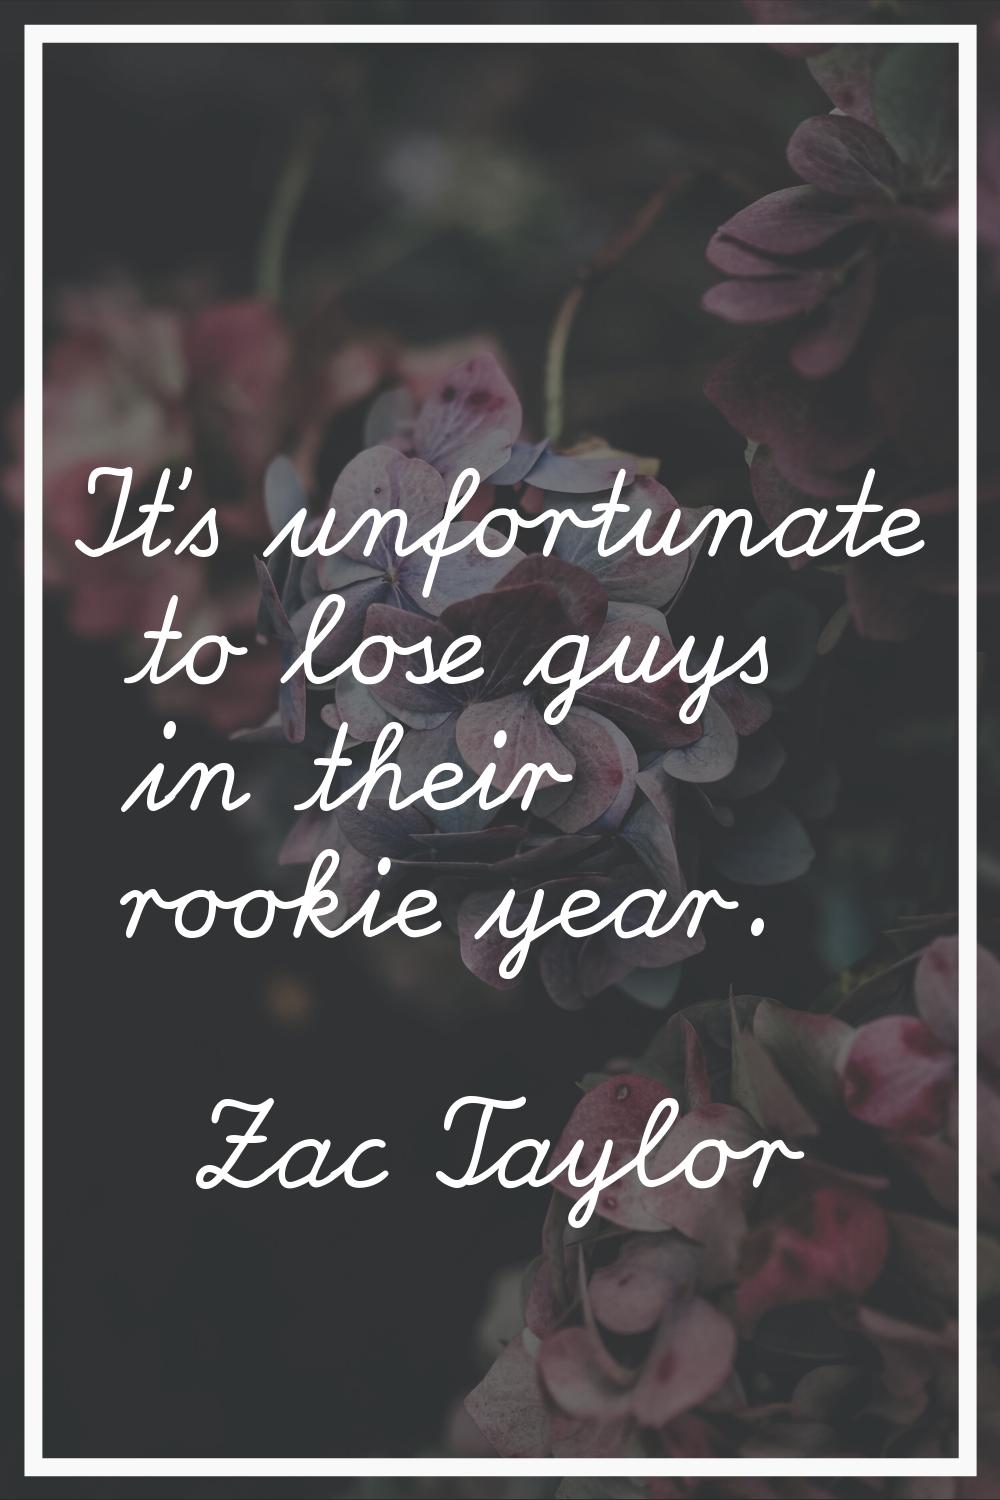 It's unfortunate to lose guys in their rookie year.